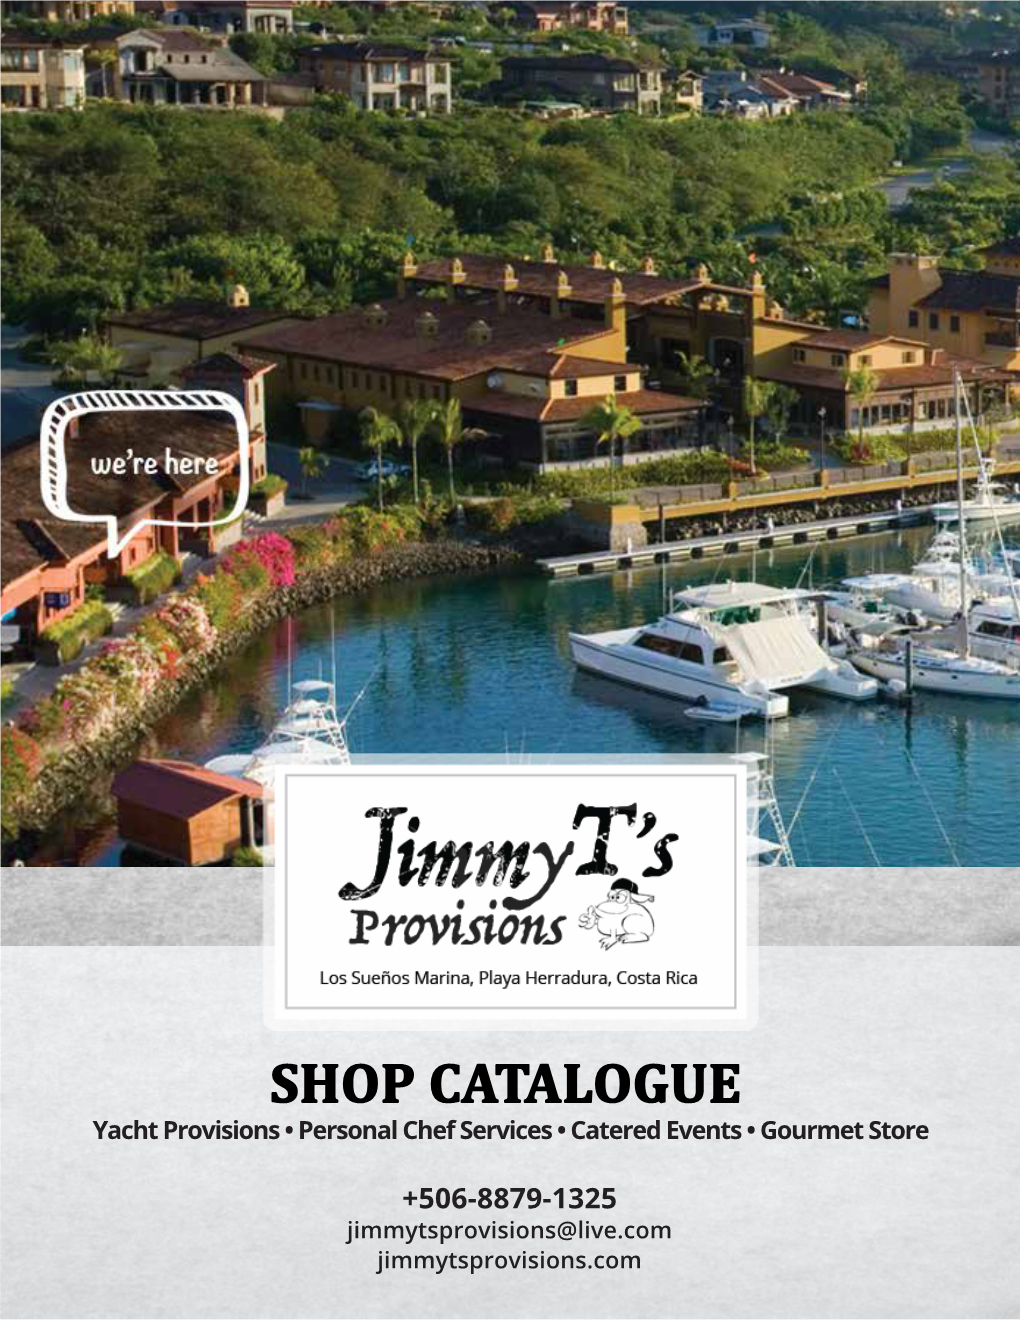 SHOP CATALOGUE Yacht Provisions • Personal Chef Services • Catered Events • Gourmet Store